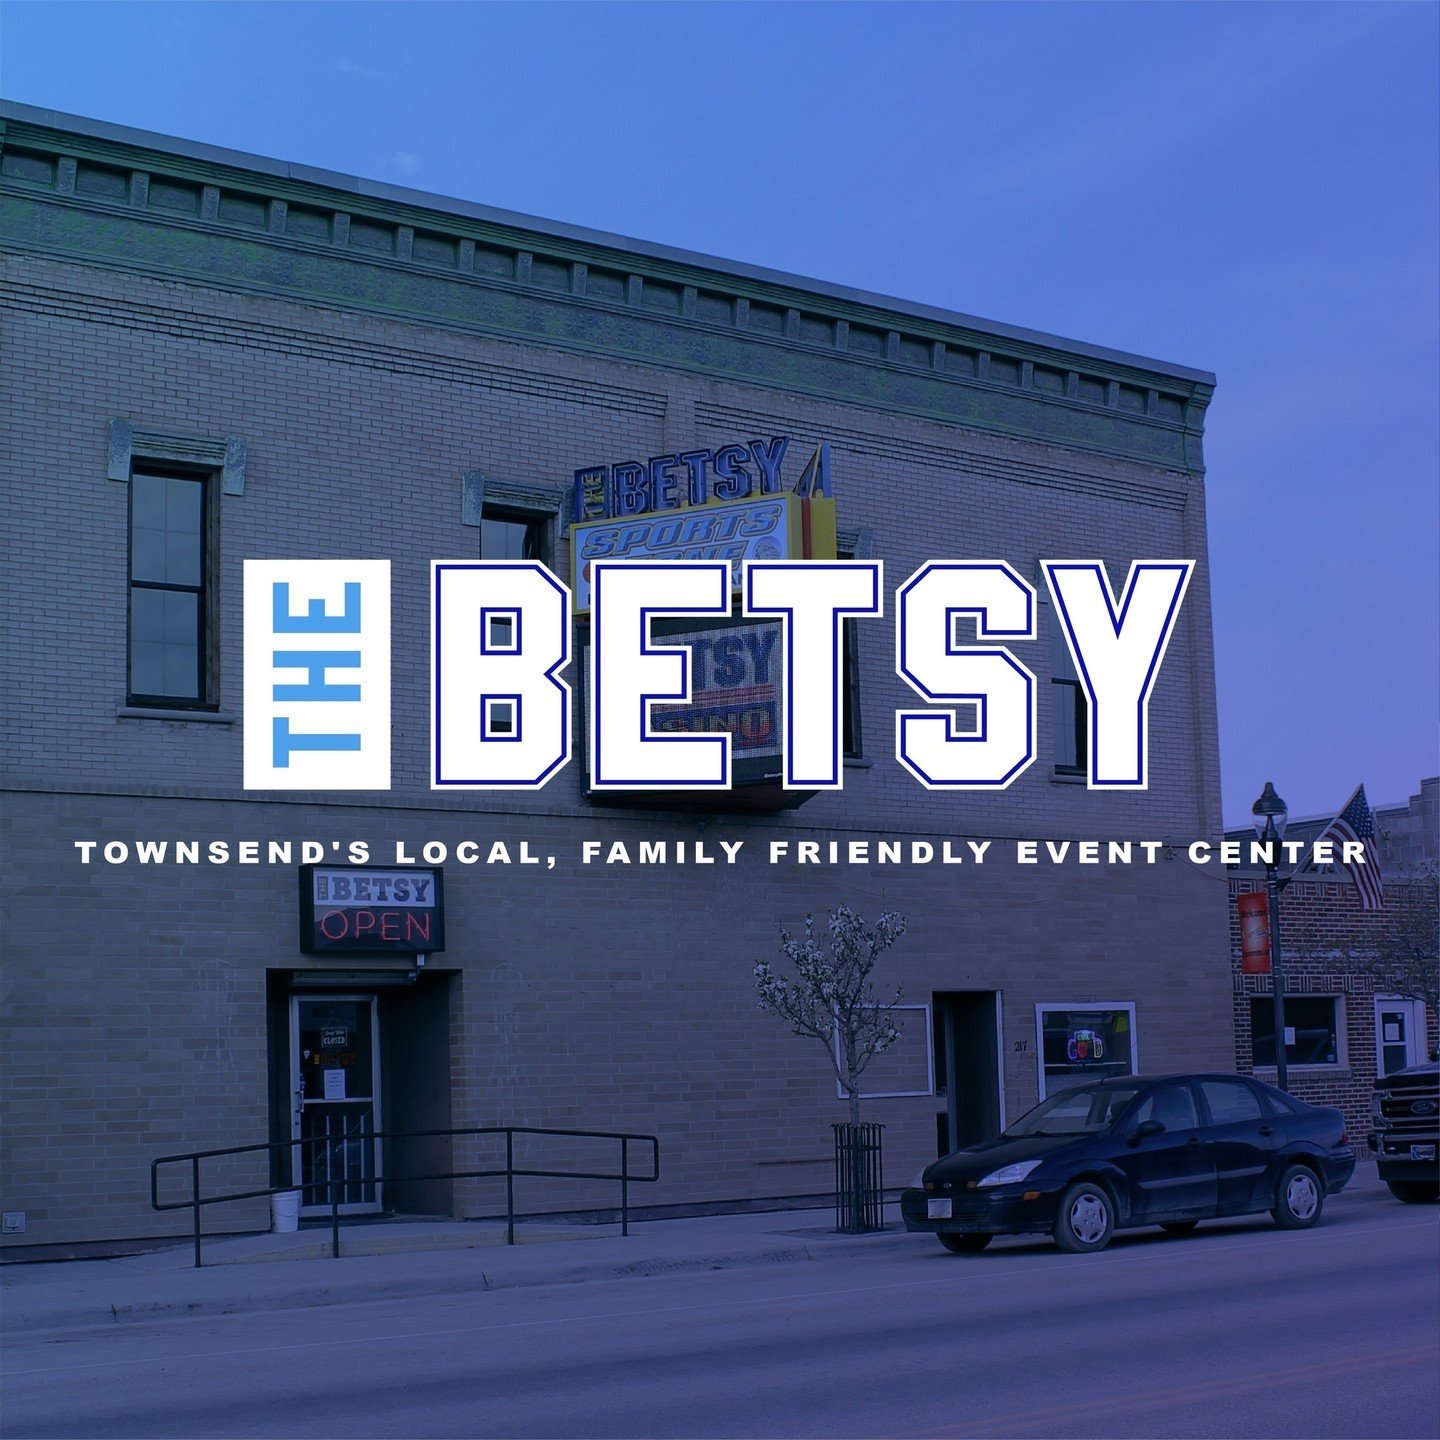 The Betsy SportsZone |  Website Design ⁠
Working with @the_betsy_sportszone in Townsend, they needed a properly working website to invite new visitors. A large focus was around making the establishment known as a family friendly space, restaurant, sp